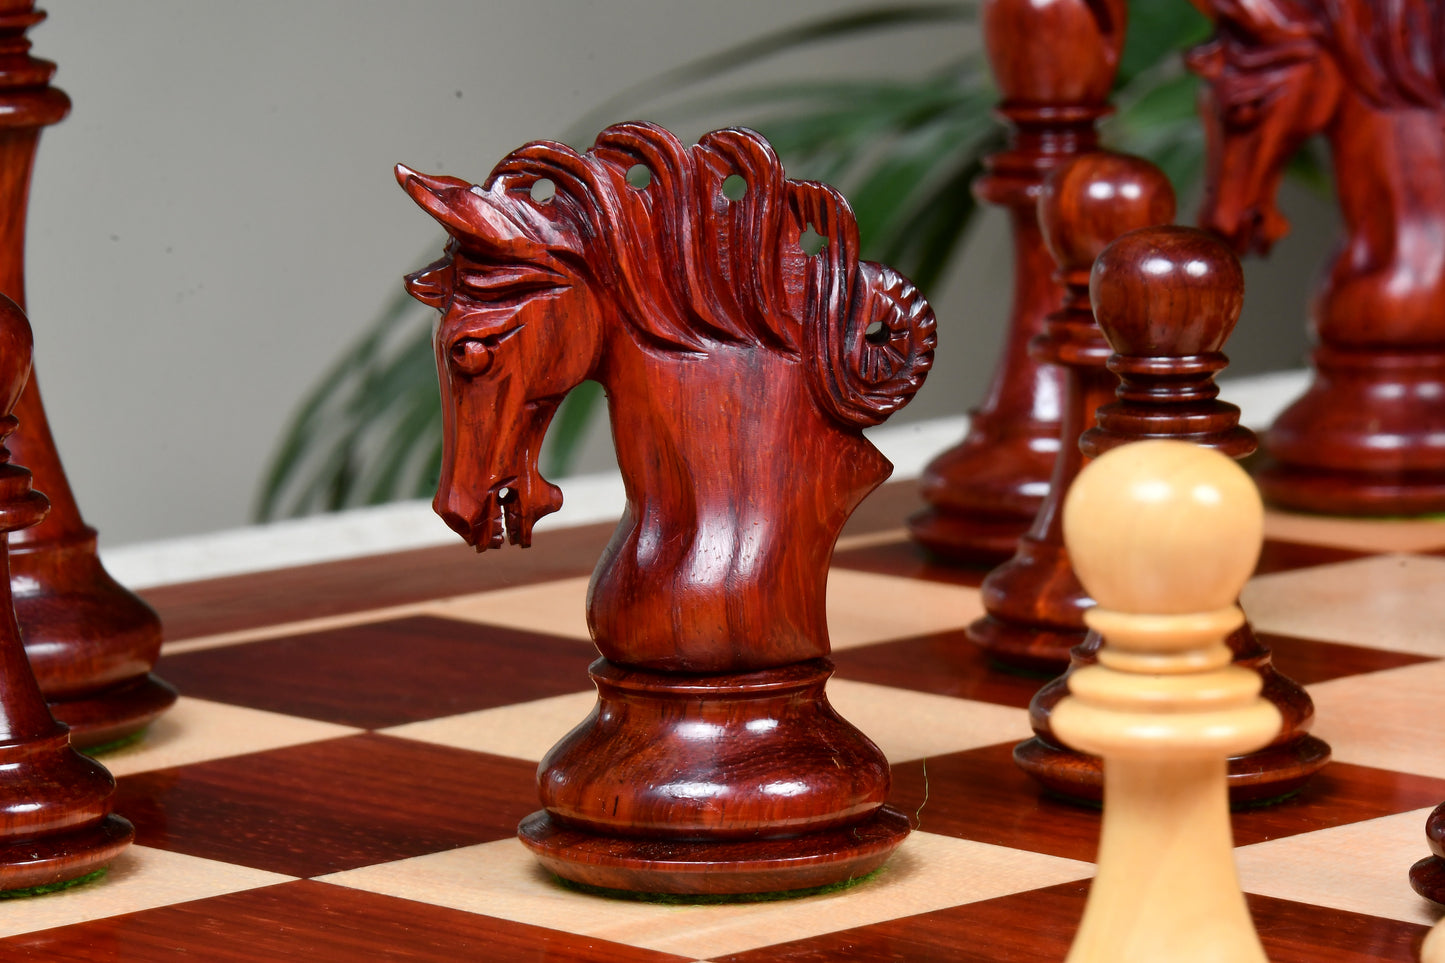 The Pegasus Series Artisan Staunton Chess Pieces ver 2.0 in Bud Rosewood and Boxwood - 4.6" King